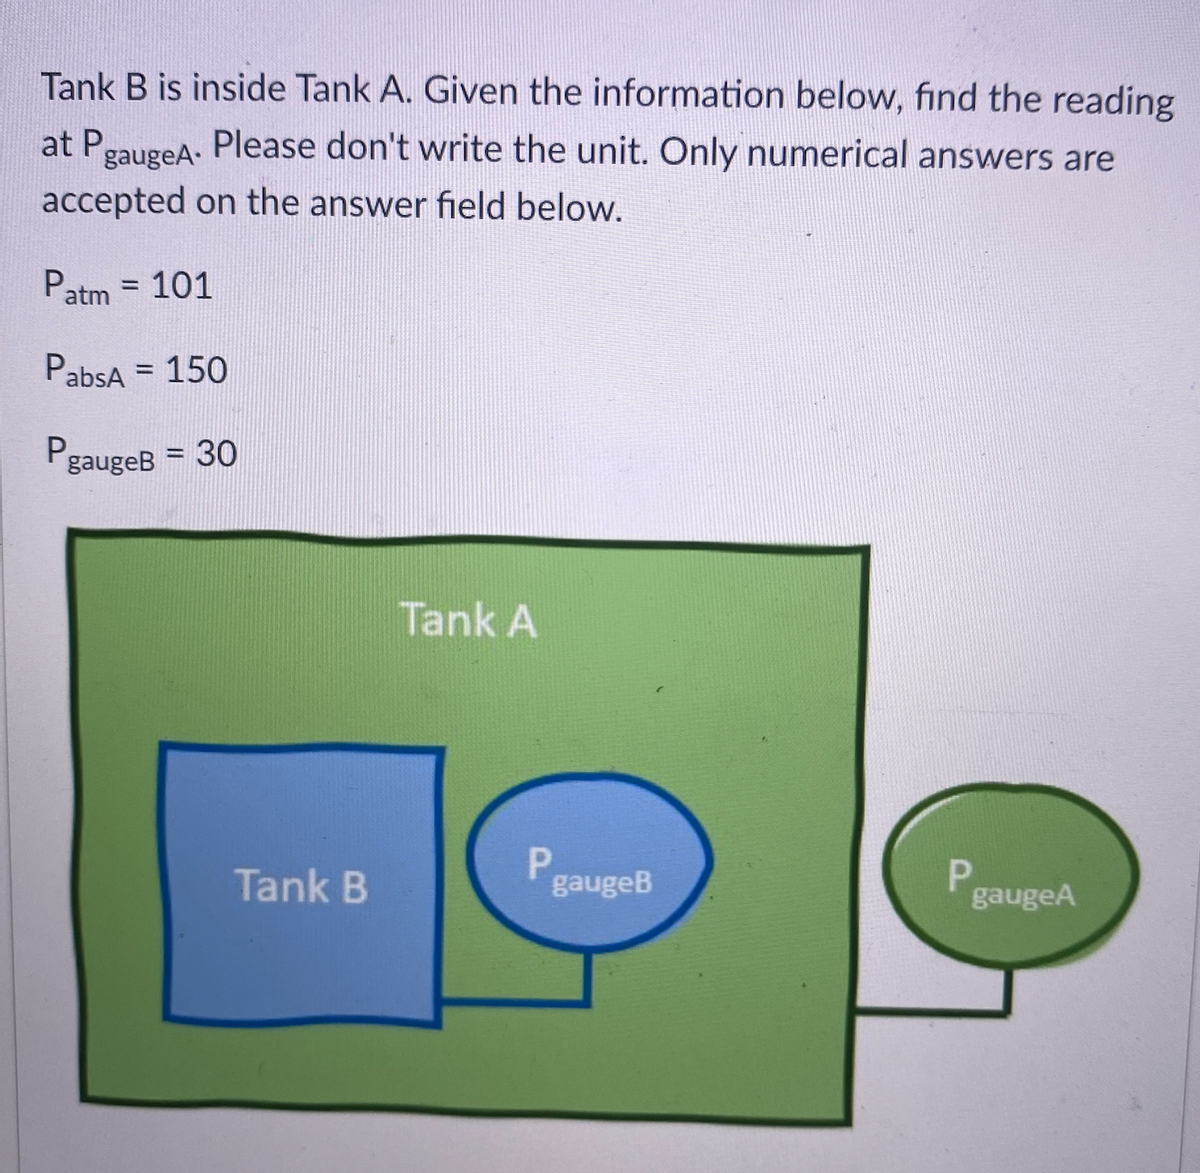 Tank B is inside Tank A. Given the information below, find the reading
at P
gaugeA-
Please don't write the unit. Only numerical answers are
accepted on the answer field below.
Patm = 101
PabsA = 150
%3D
%3D
gaugeB = 30
Tank A
Tank B
P.
PgaugeA
gaugeB
